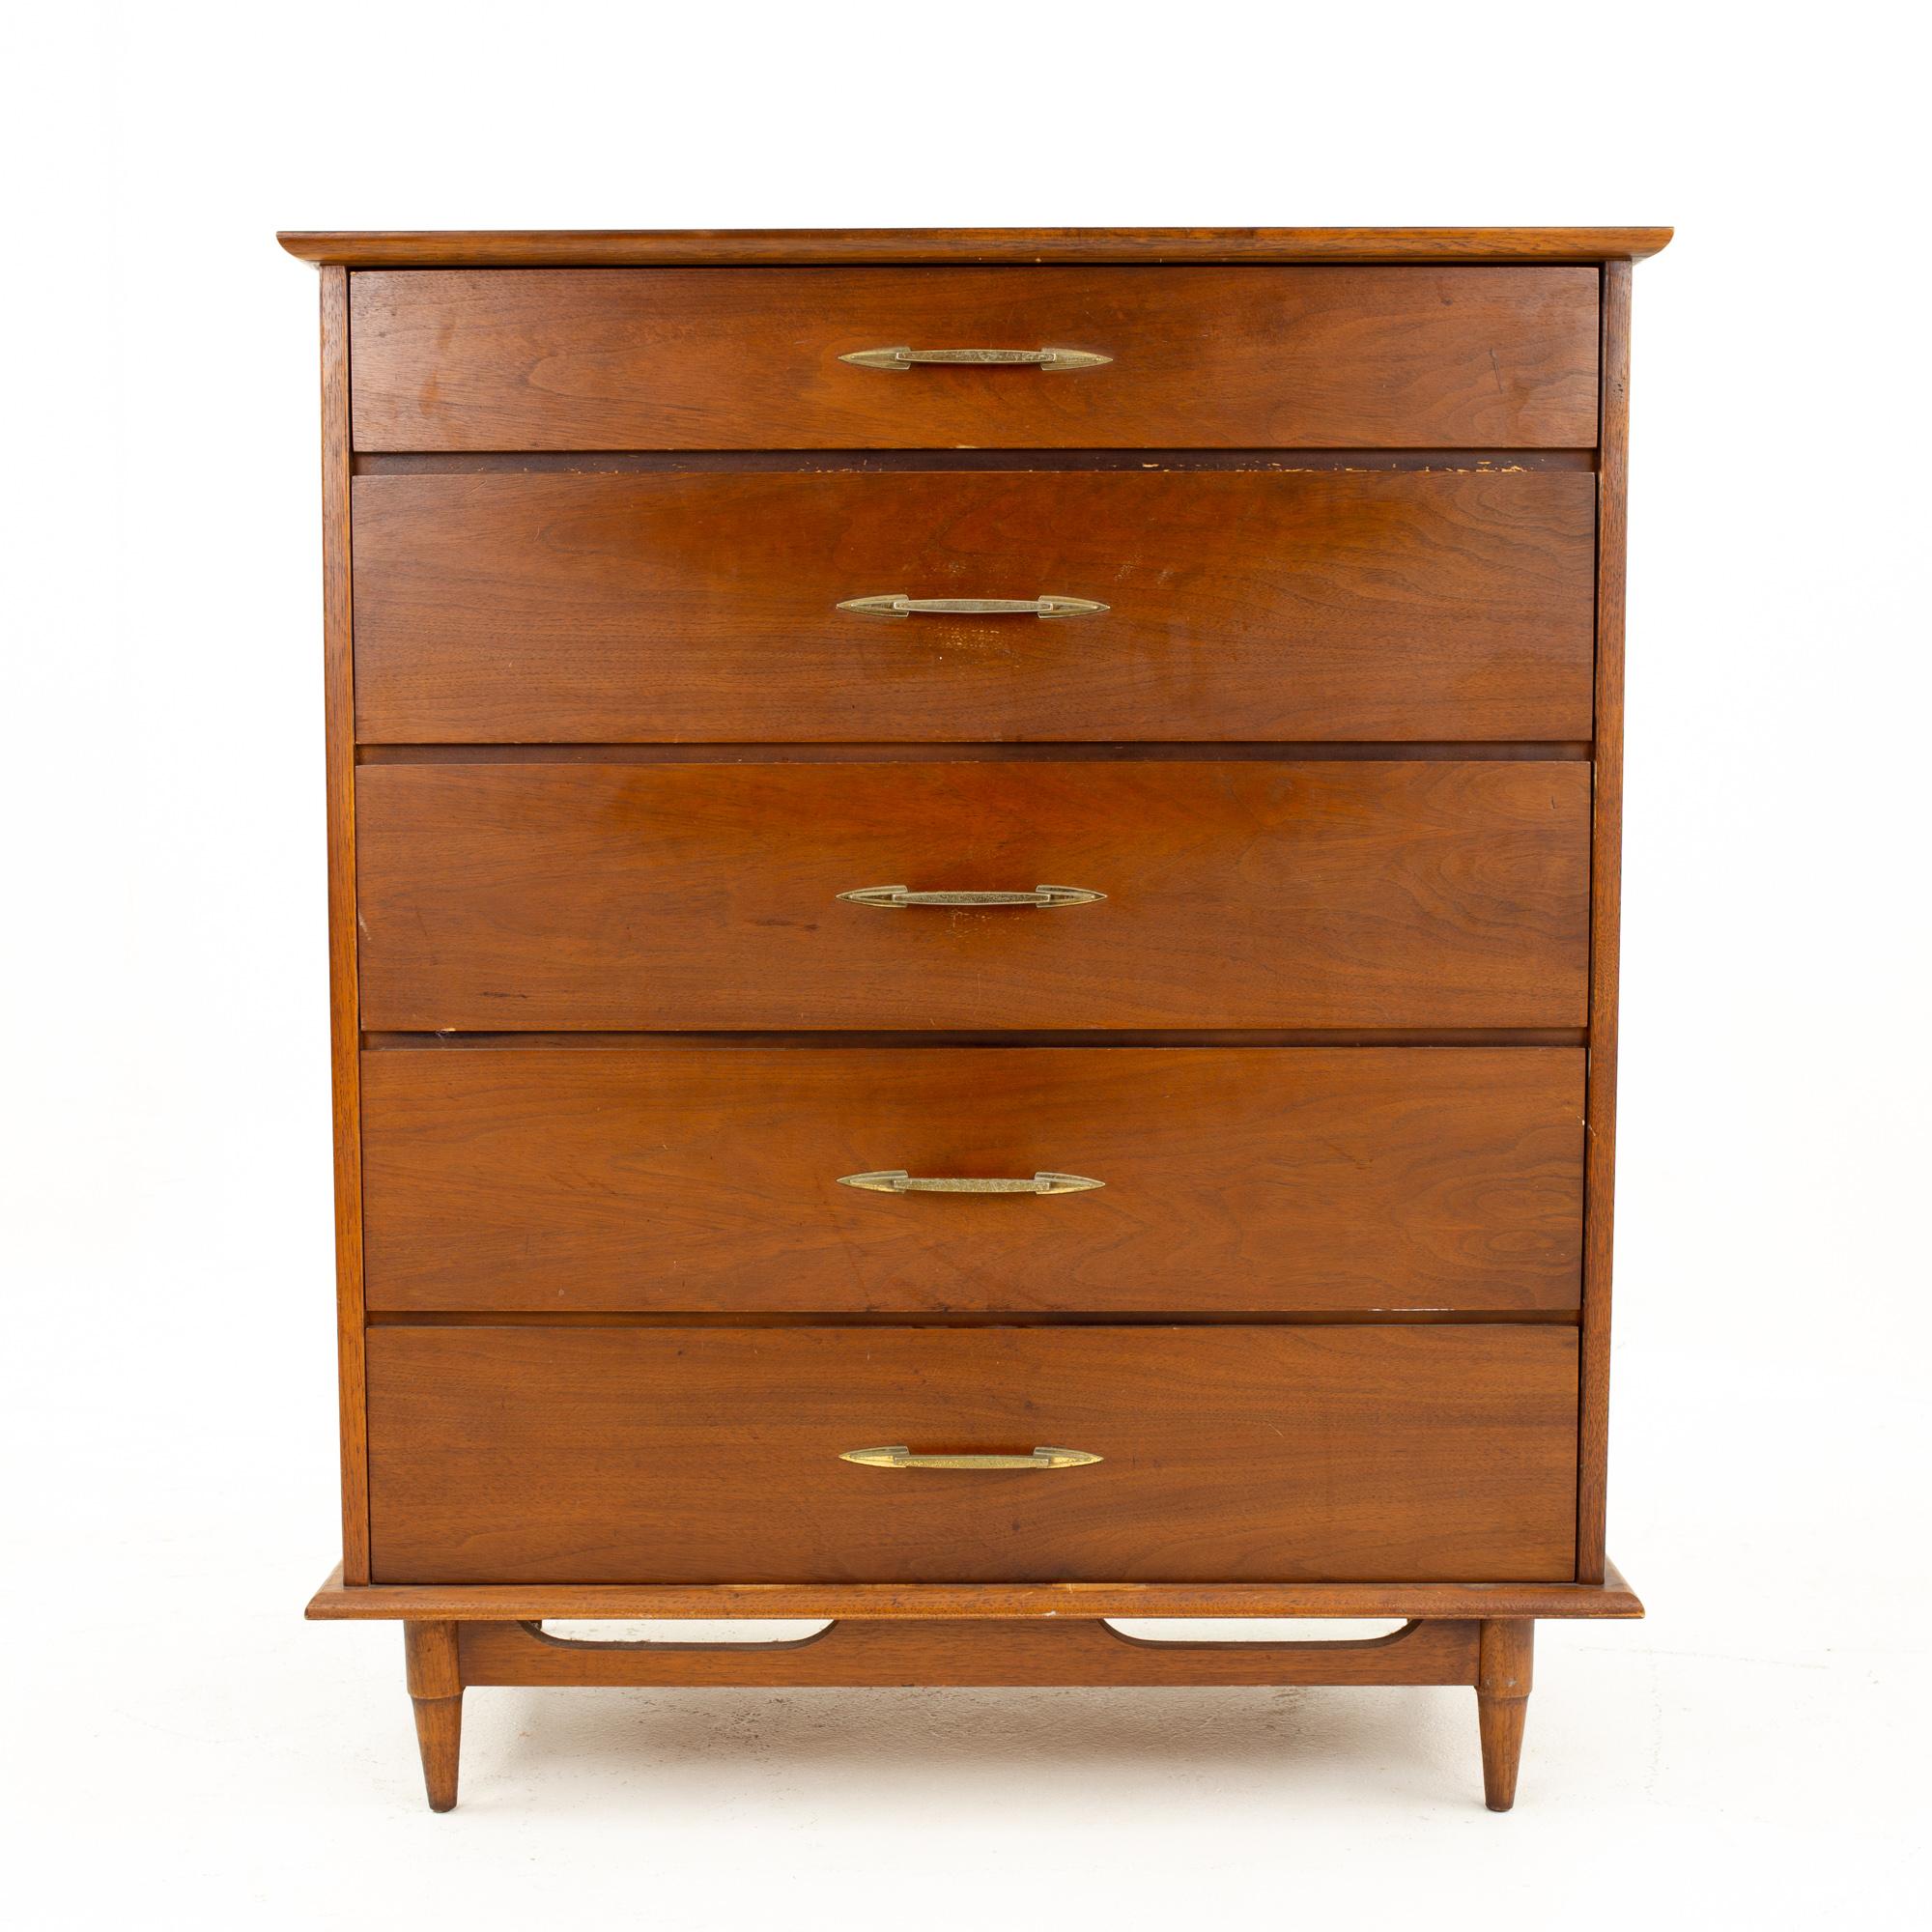 Lane Mid Century 5-drawer highboy dresser

Dresser measures: 38 wide x 19.5 deep x 45 high

This price includes getting this piece in what we call restored vintage condition. That means the piece is permanently fixed upon purchase so it’s free of